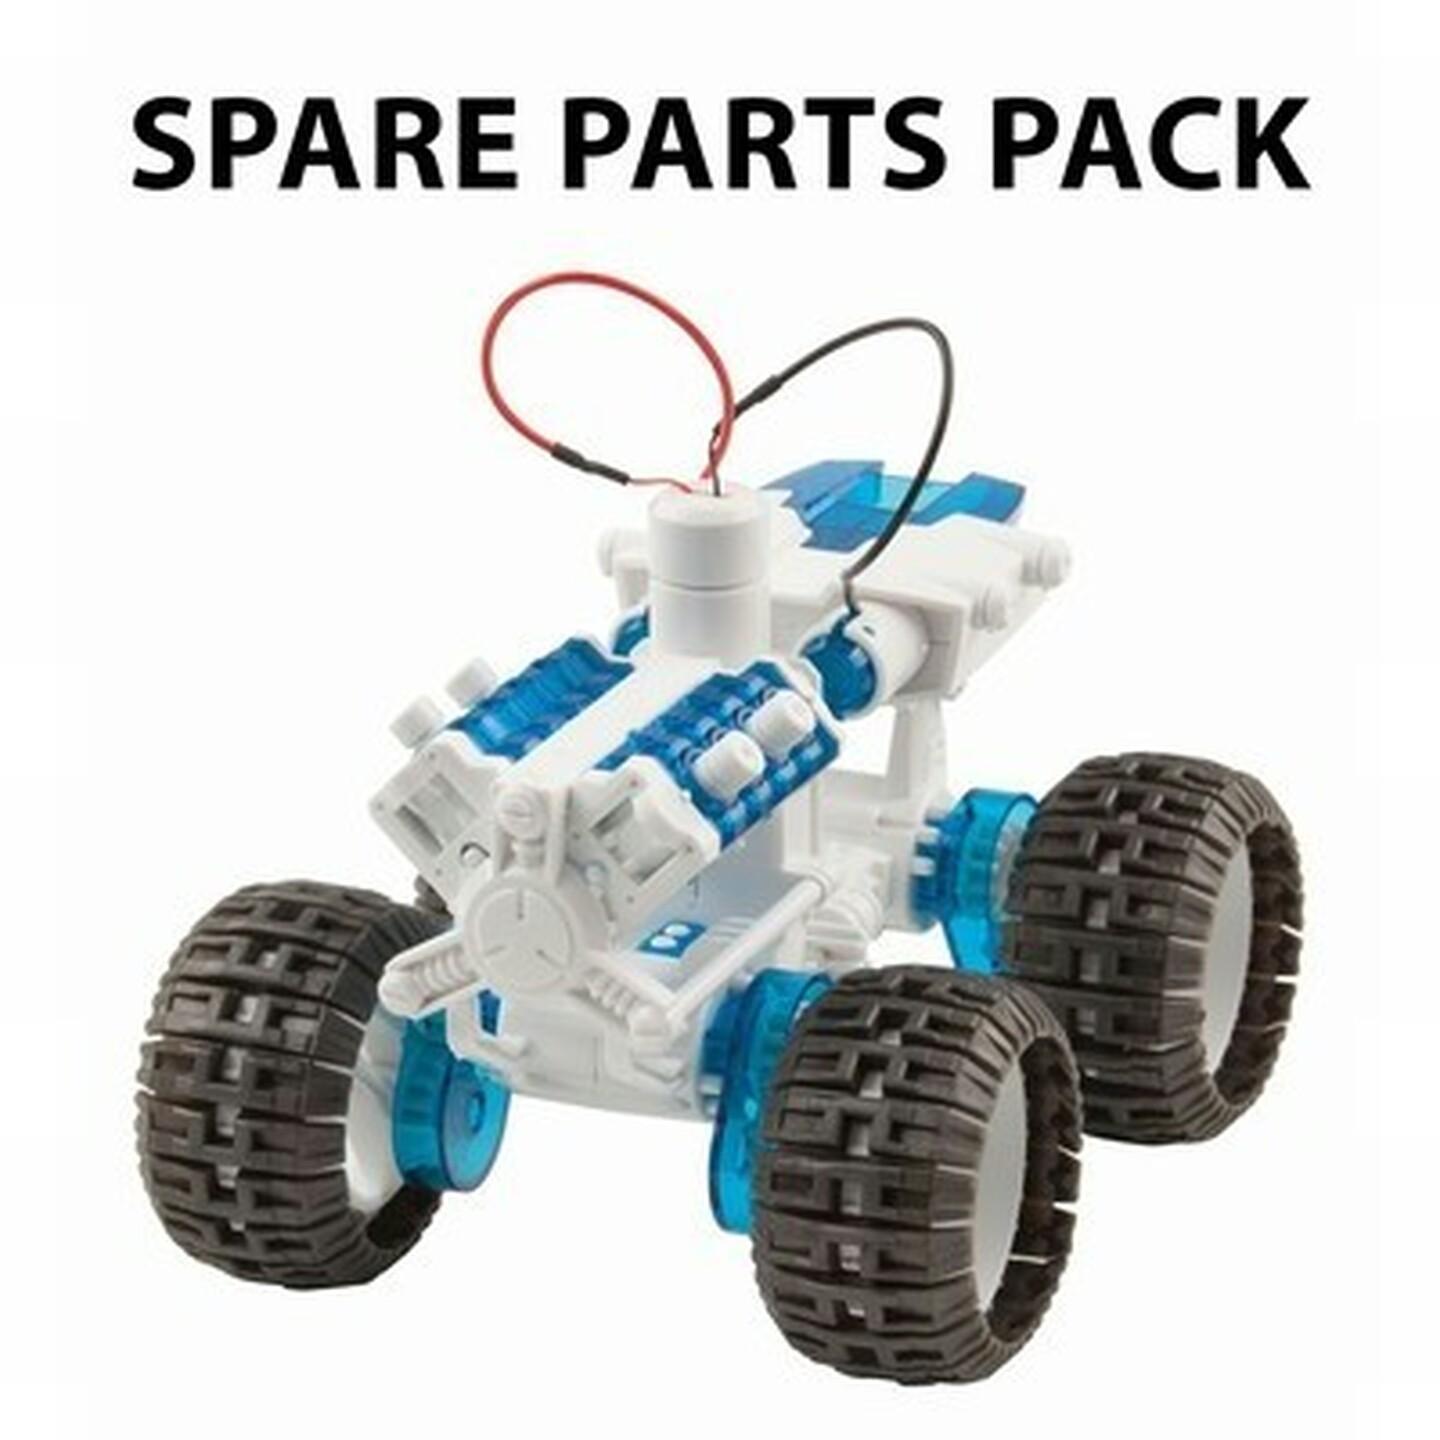 Spare Parts Pack to suit KJ8960 Fuel Cell Car Kit